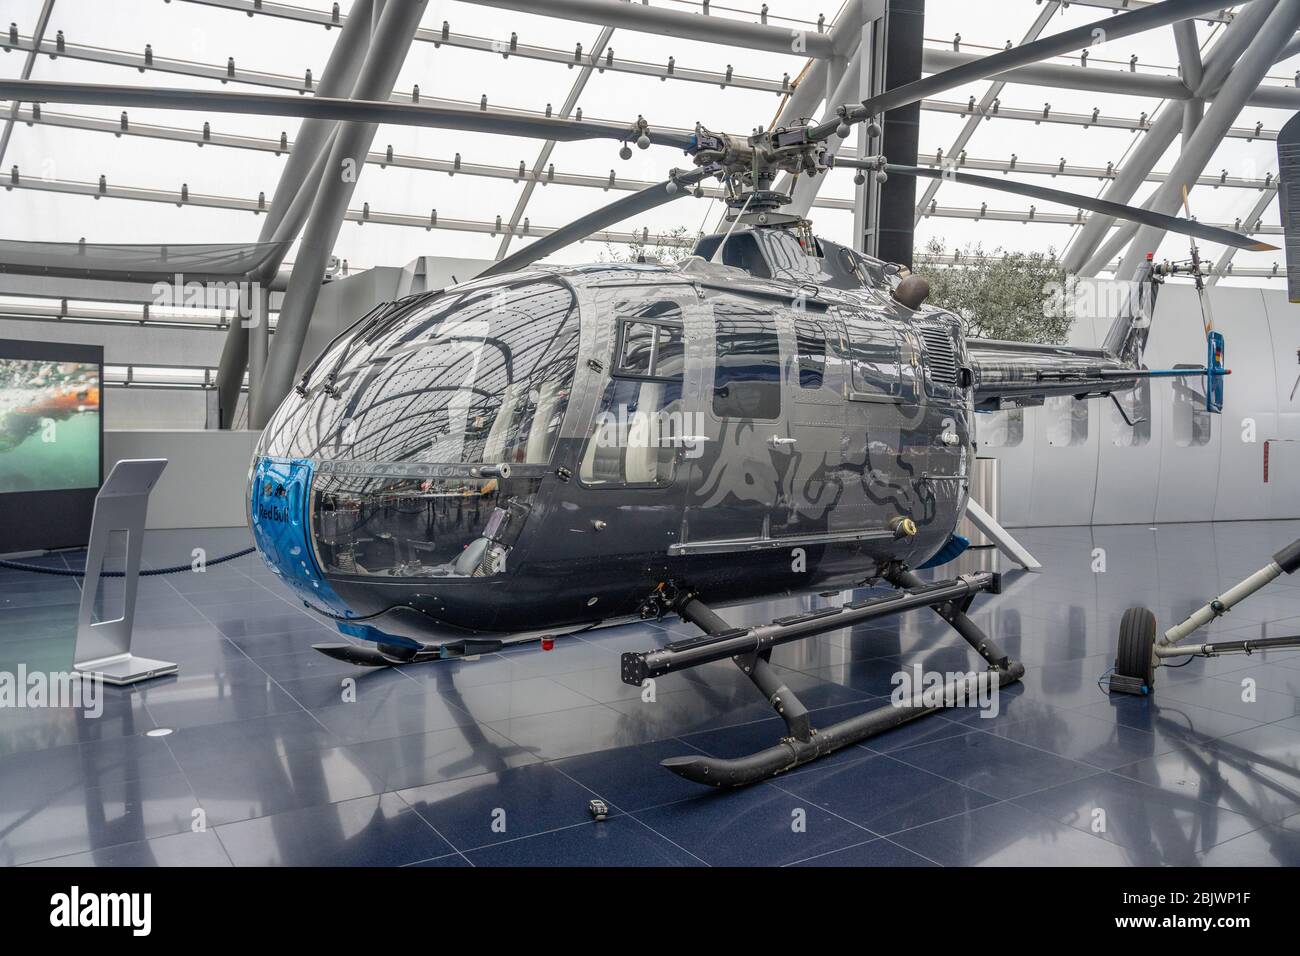 Feb 3, 2020 - Salzburg, Austria: Spezifikationen helicopter in display at Flying Bull Hangar-7 Center hall Stock Photo